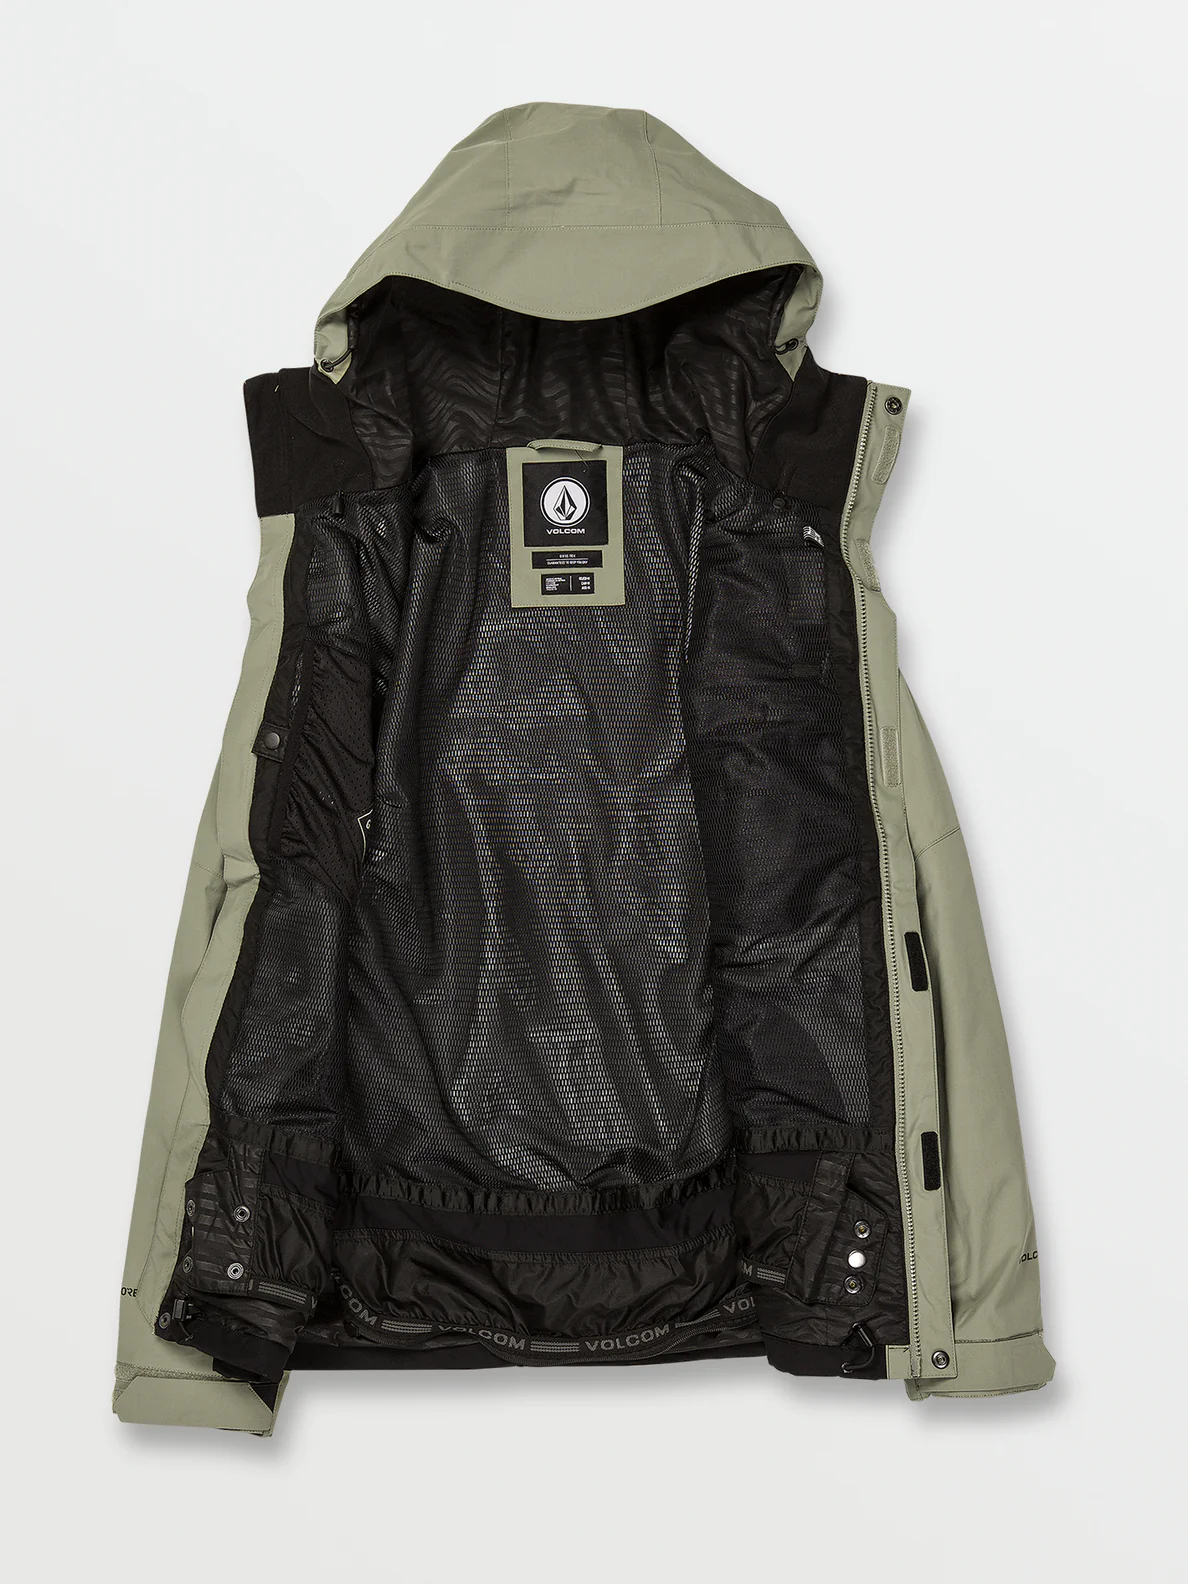 VOLCOM | L INSULATED GORE-TEX JACKET LIGHT MILITARY - Universe